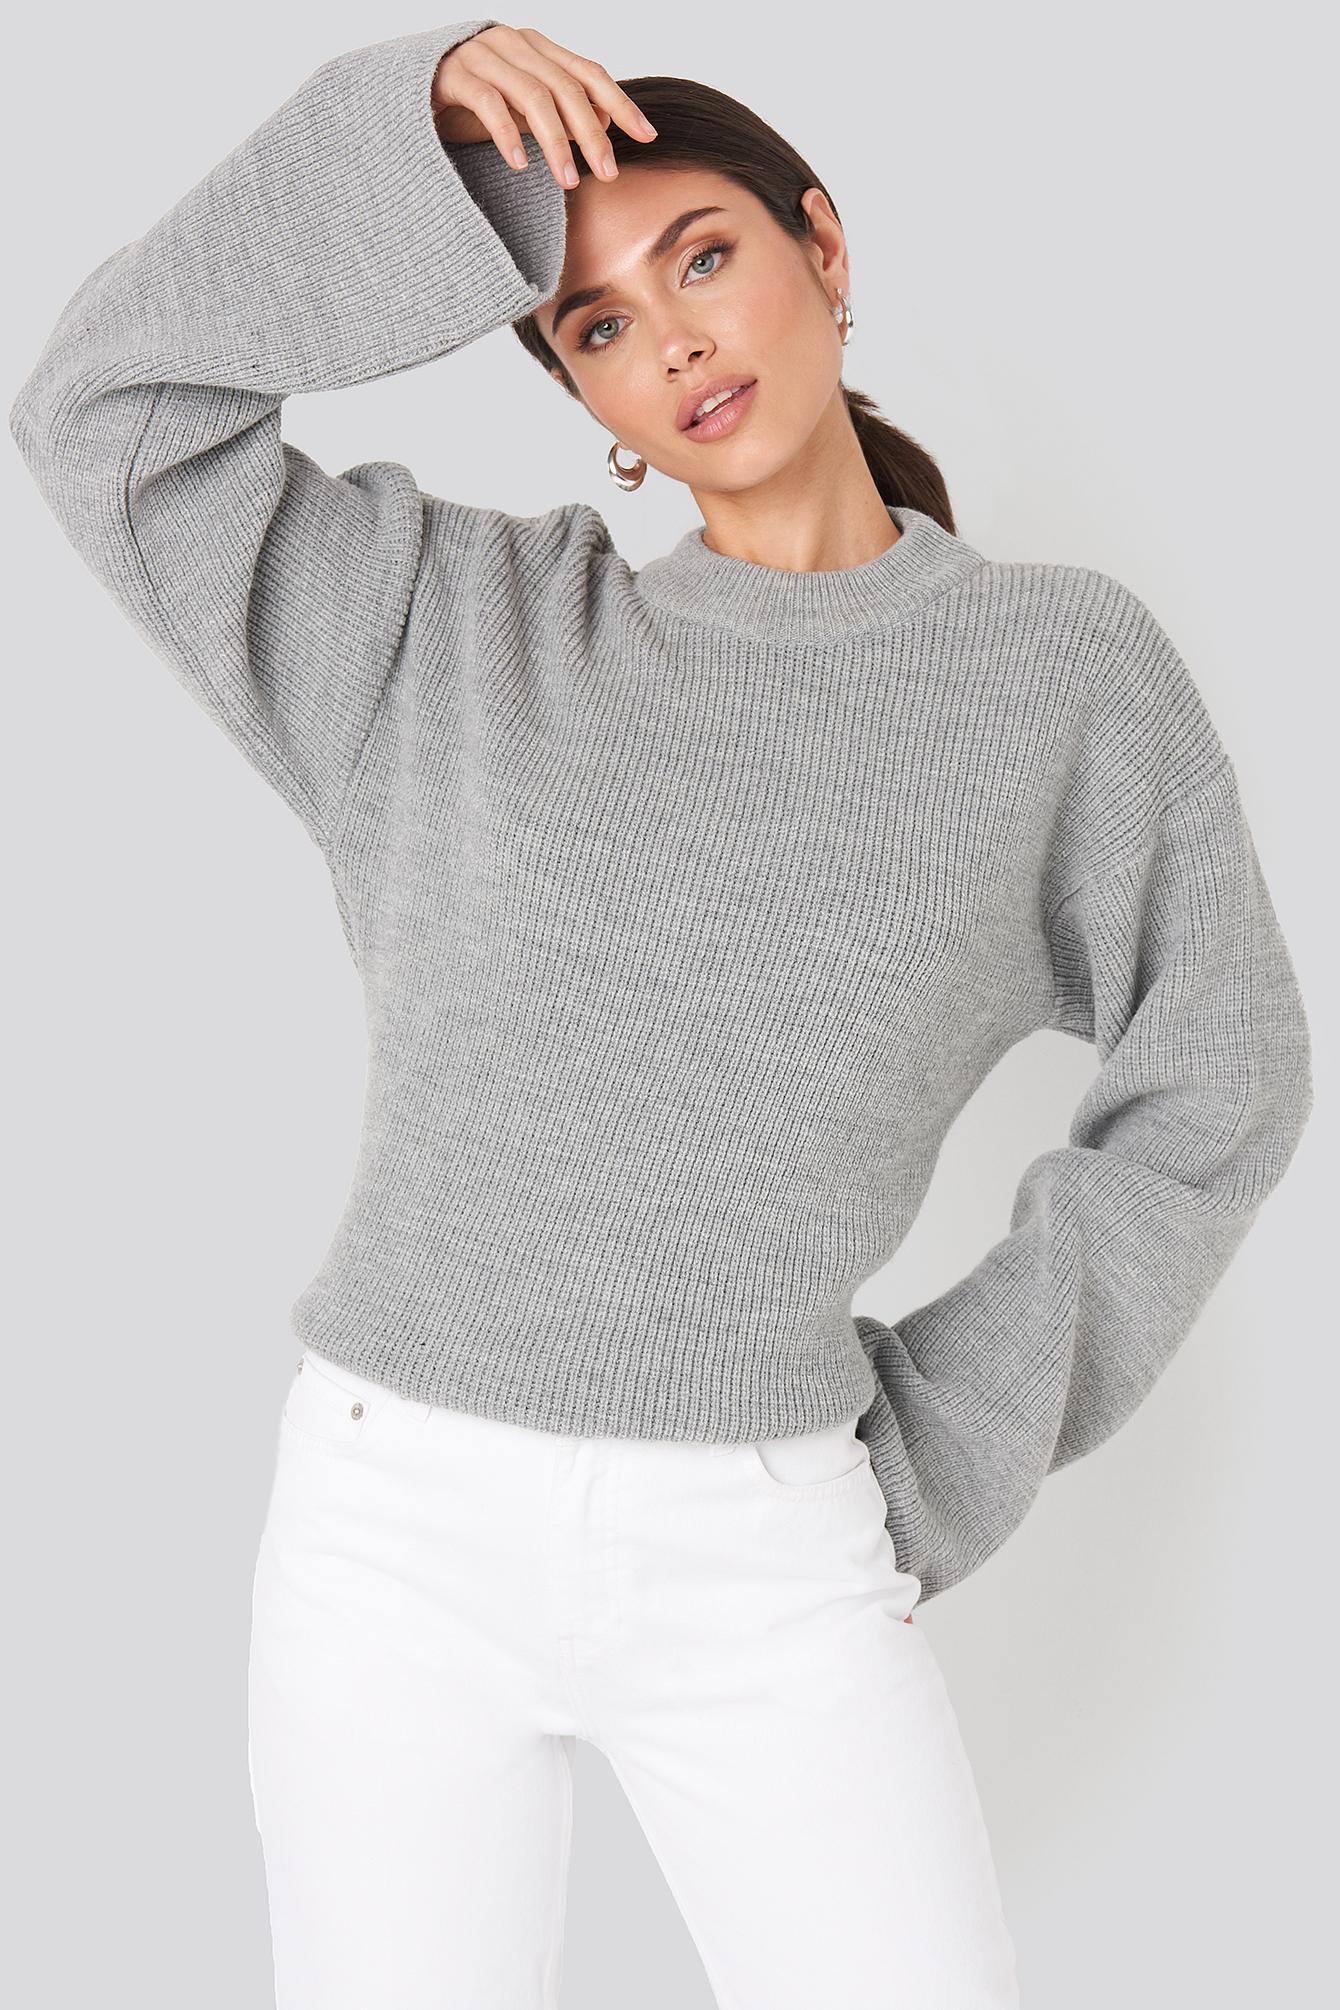 NA-KD Grey Wide Sleeve Round Neck Knitted Sweater in Gray | Lyst